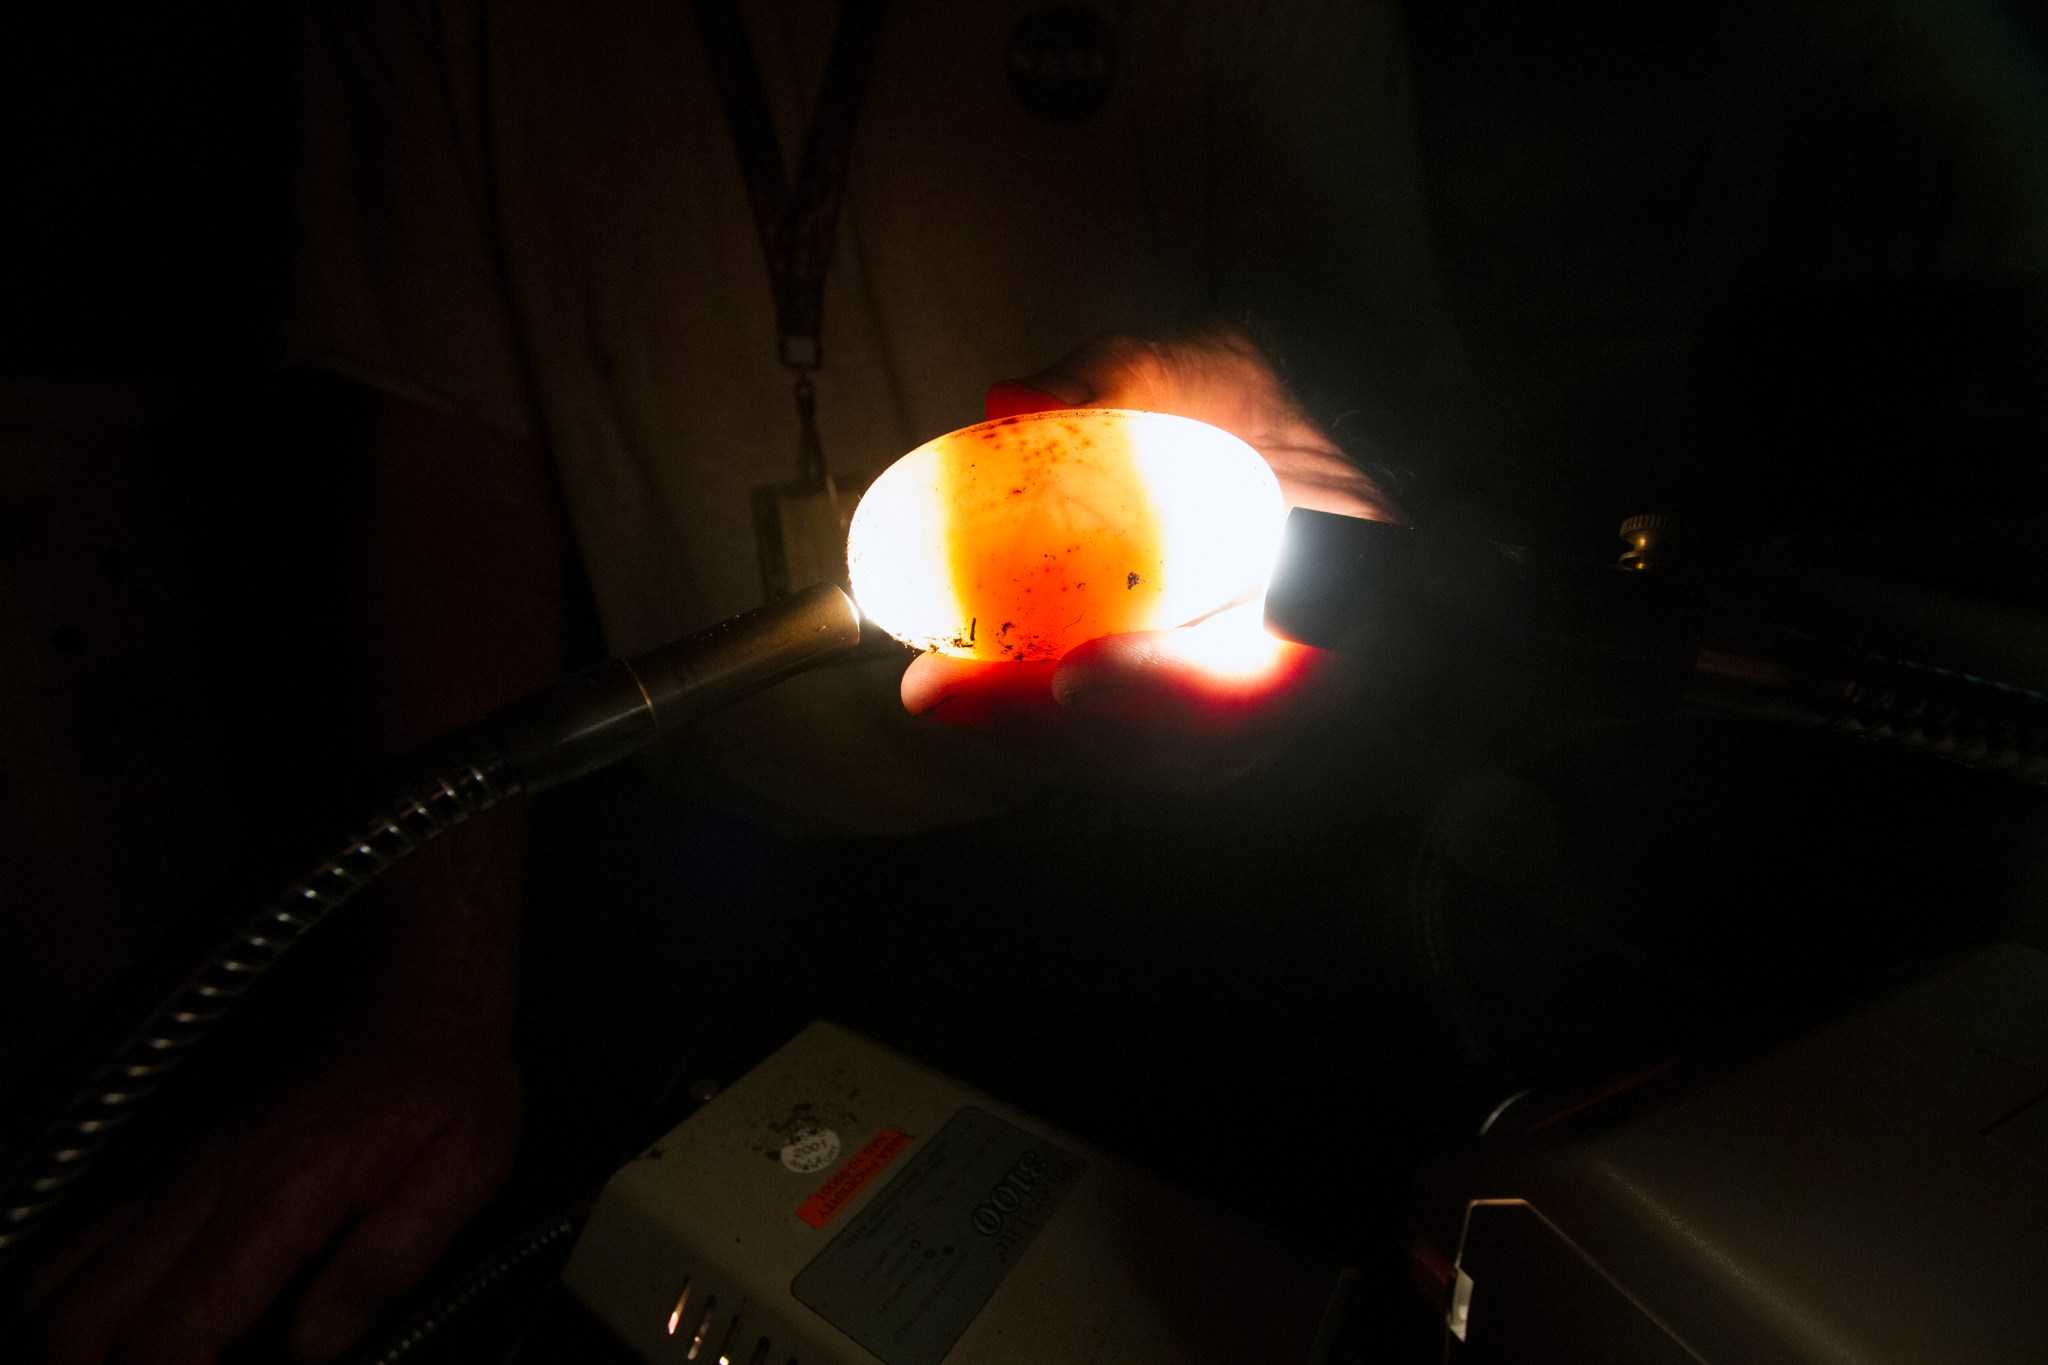 A dark band filling the center of an illuminated alligator egg reveals the egg to be viable in a process called candling.